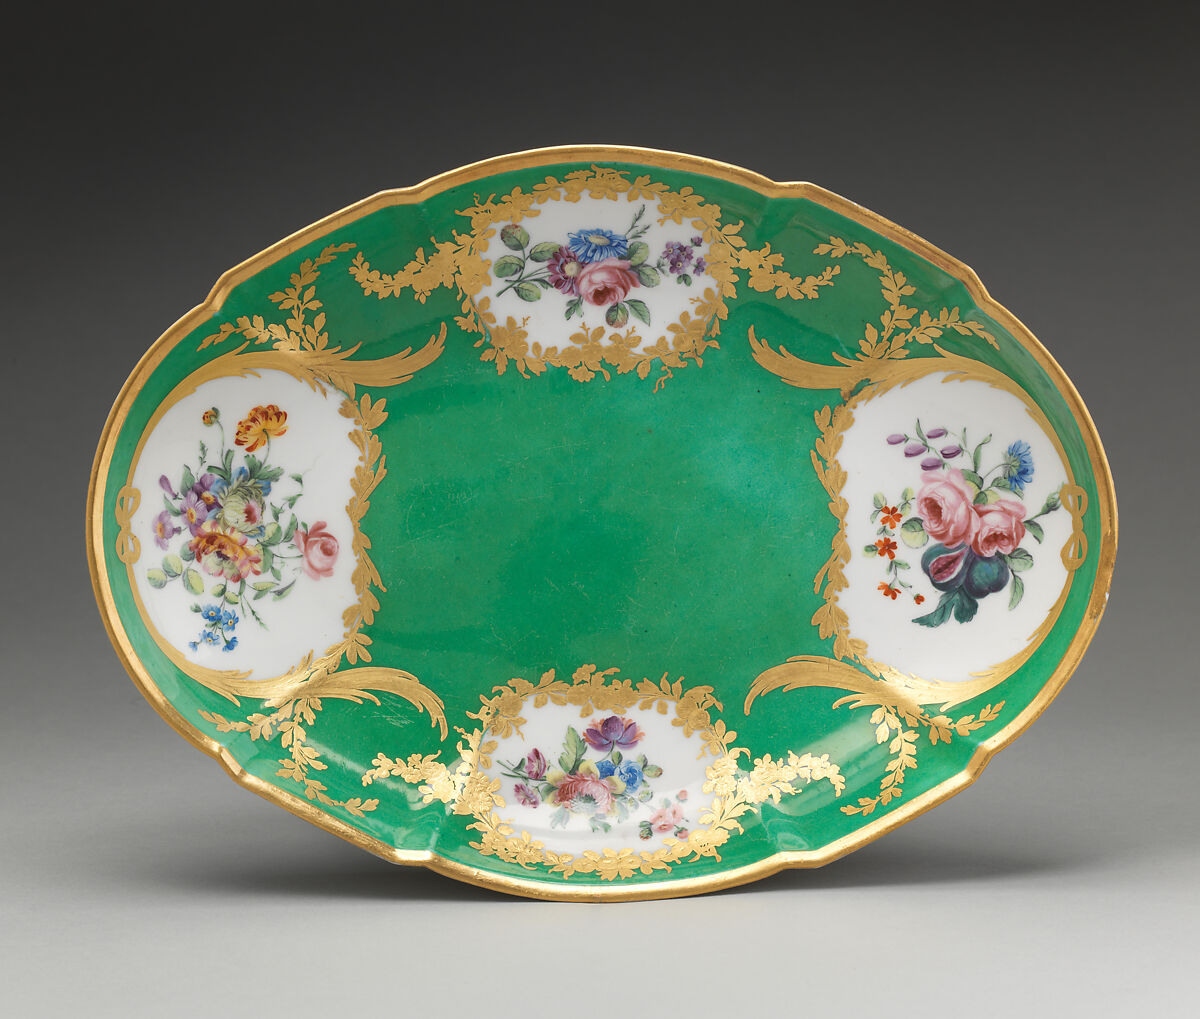 Fruit dish (compotier ovale) (one of two) (part of a service), Sèvres Manufactory (French, 1740–present), Soft-paste porcelain, French, Sèvres 